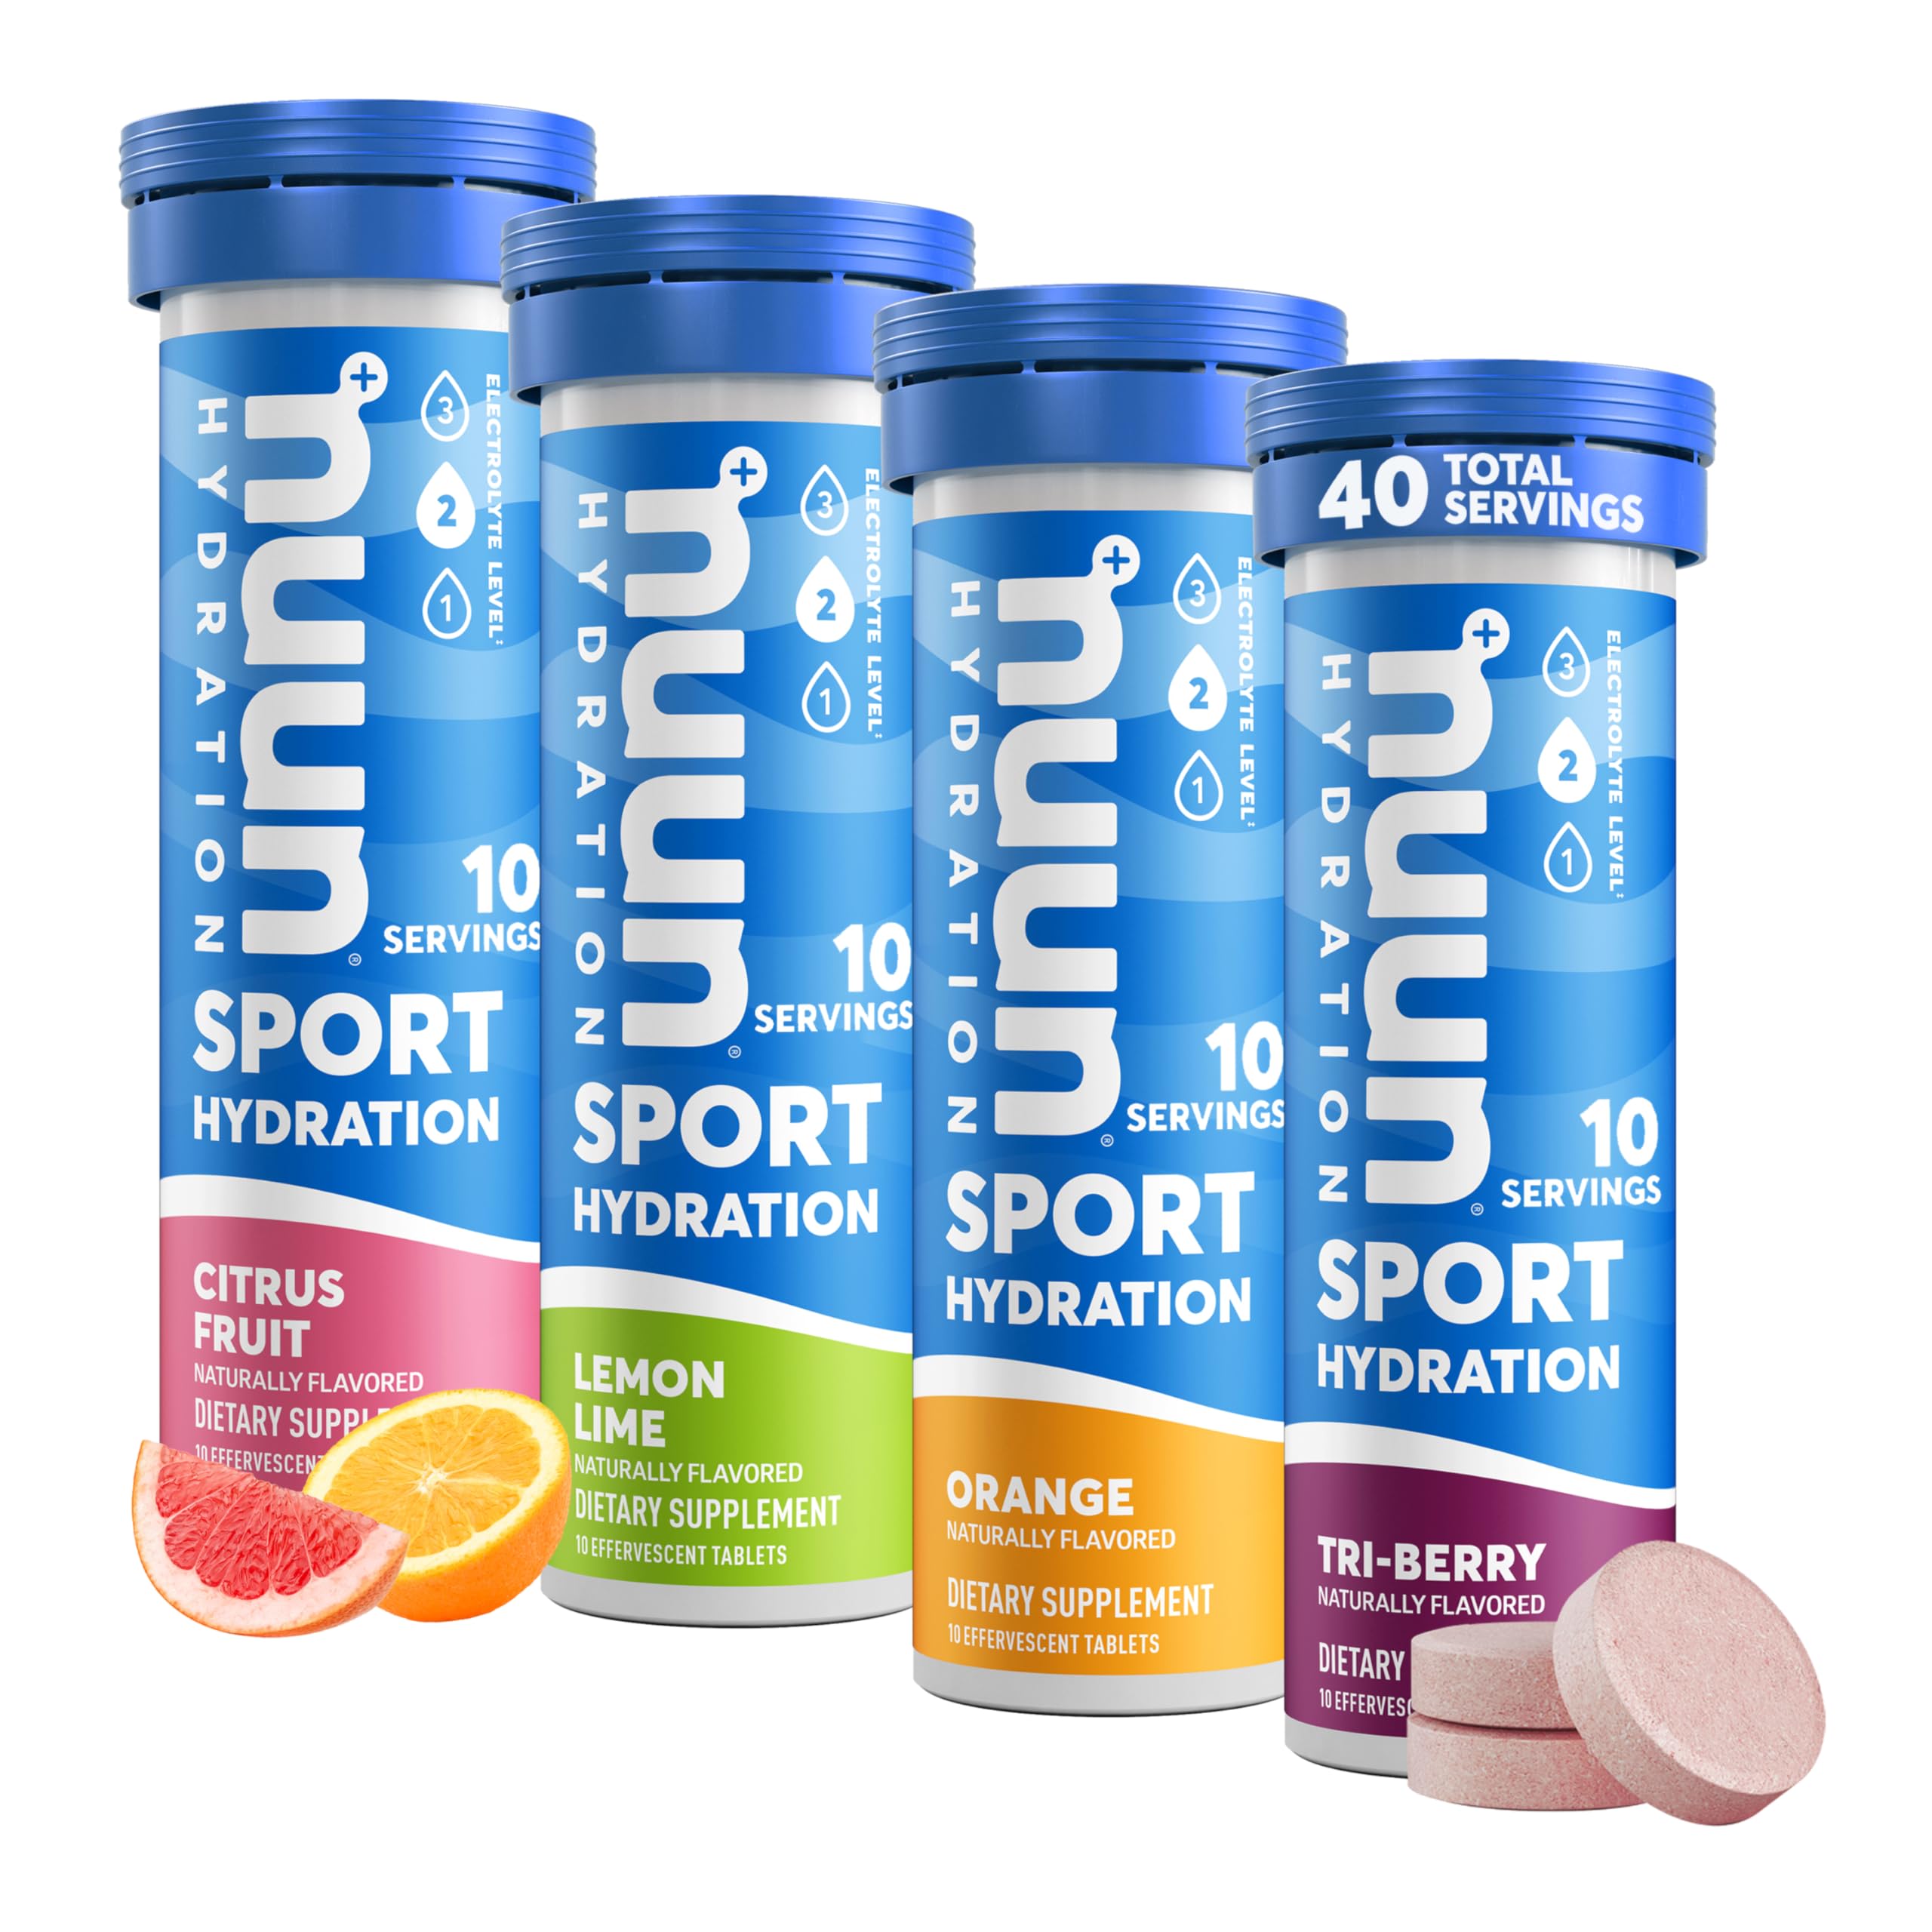 GU Energy Original Sports Nutrition Energy Gel, 24-Count, Assorted Flavors & Nuun Sport Electrolyte Tablets for Proactive Hydration, Mixed Citrus Berry Flavors, 4 Pack (40 Servings)